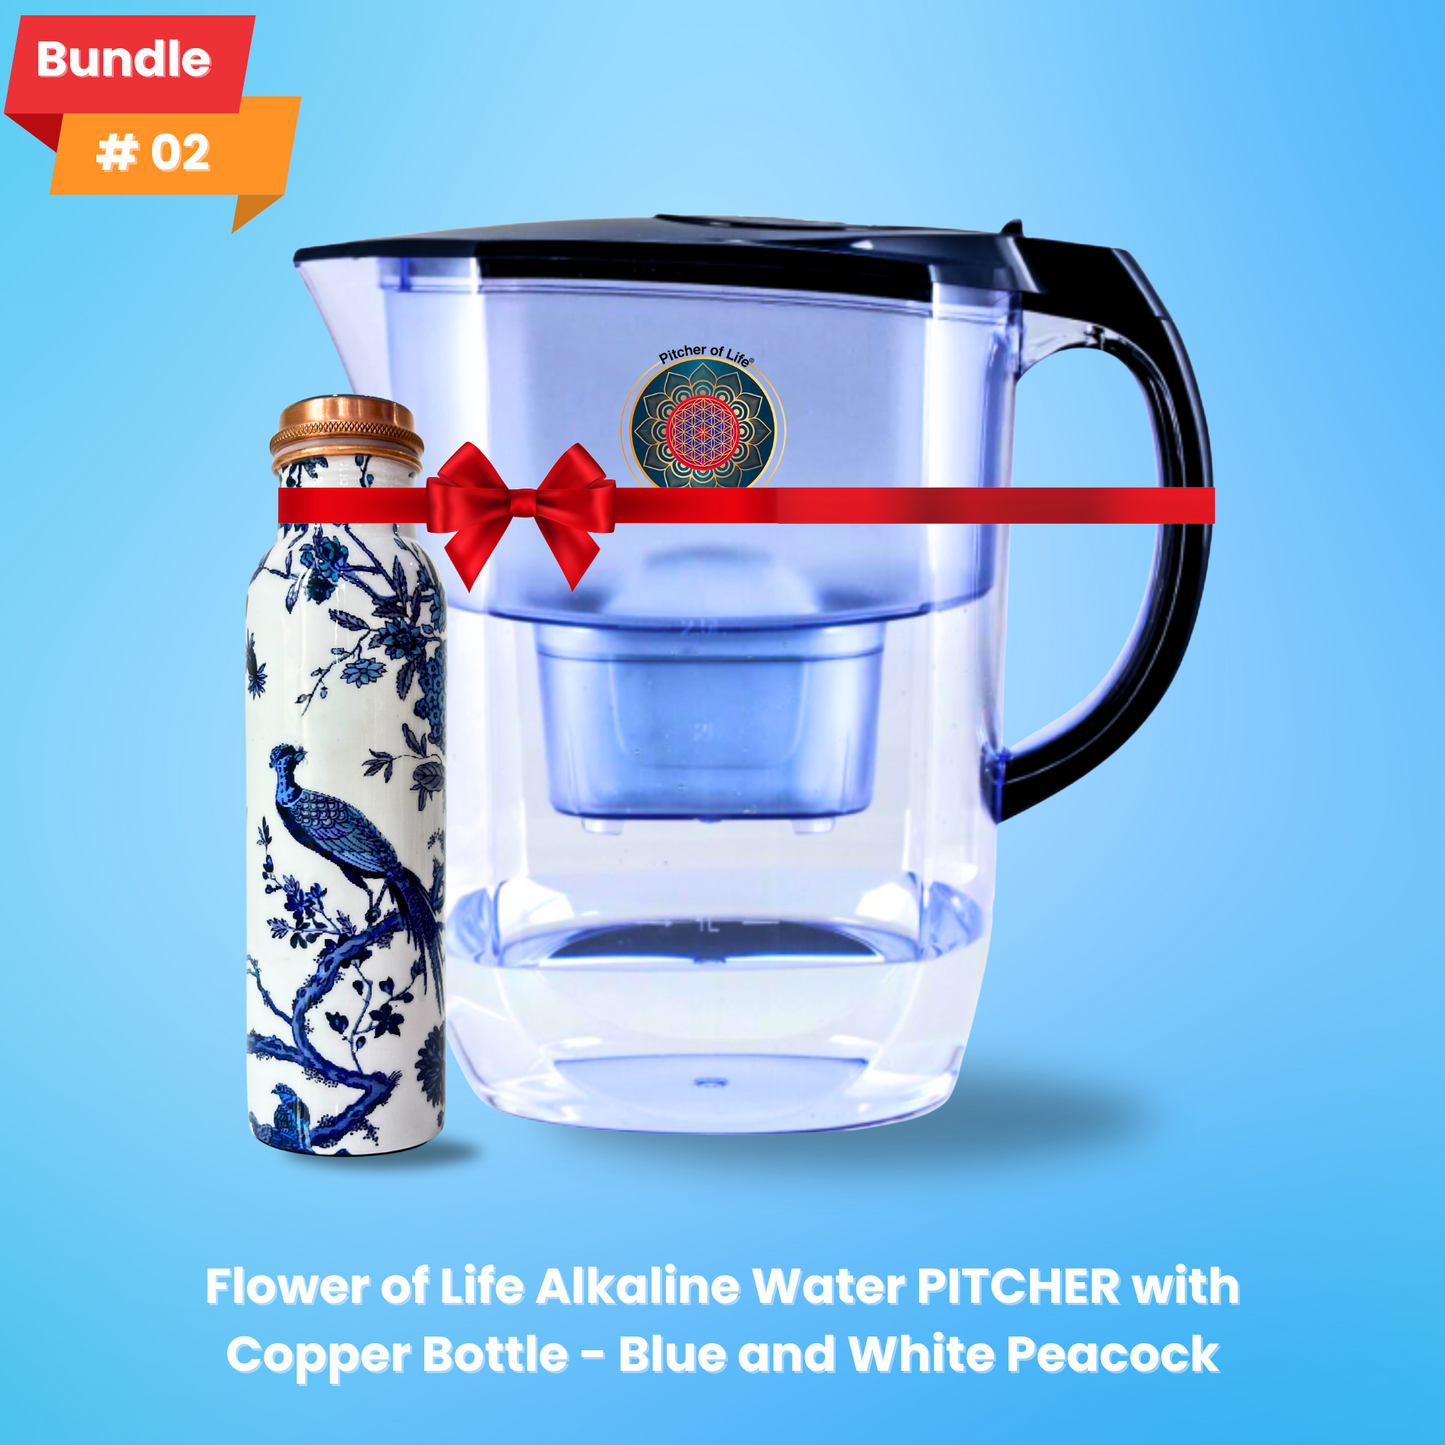 Flower of Life Alkaline Water PITCHER with Copper Bottle